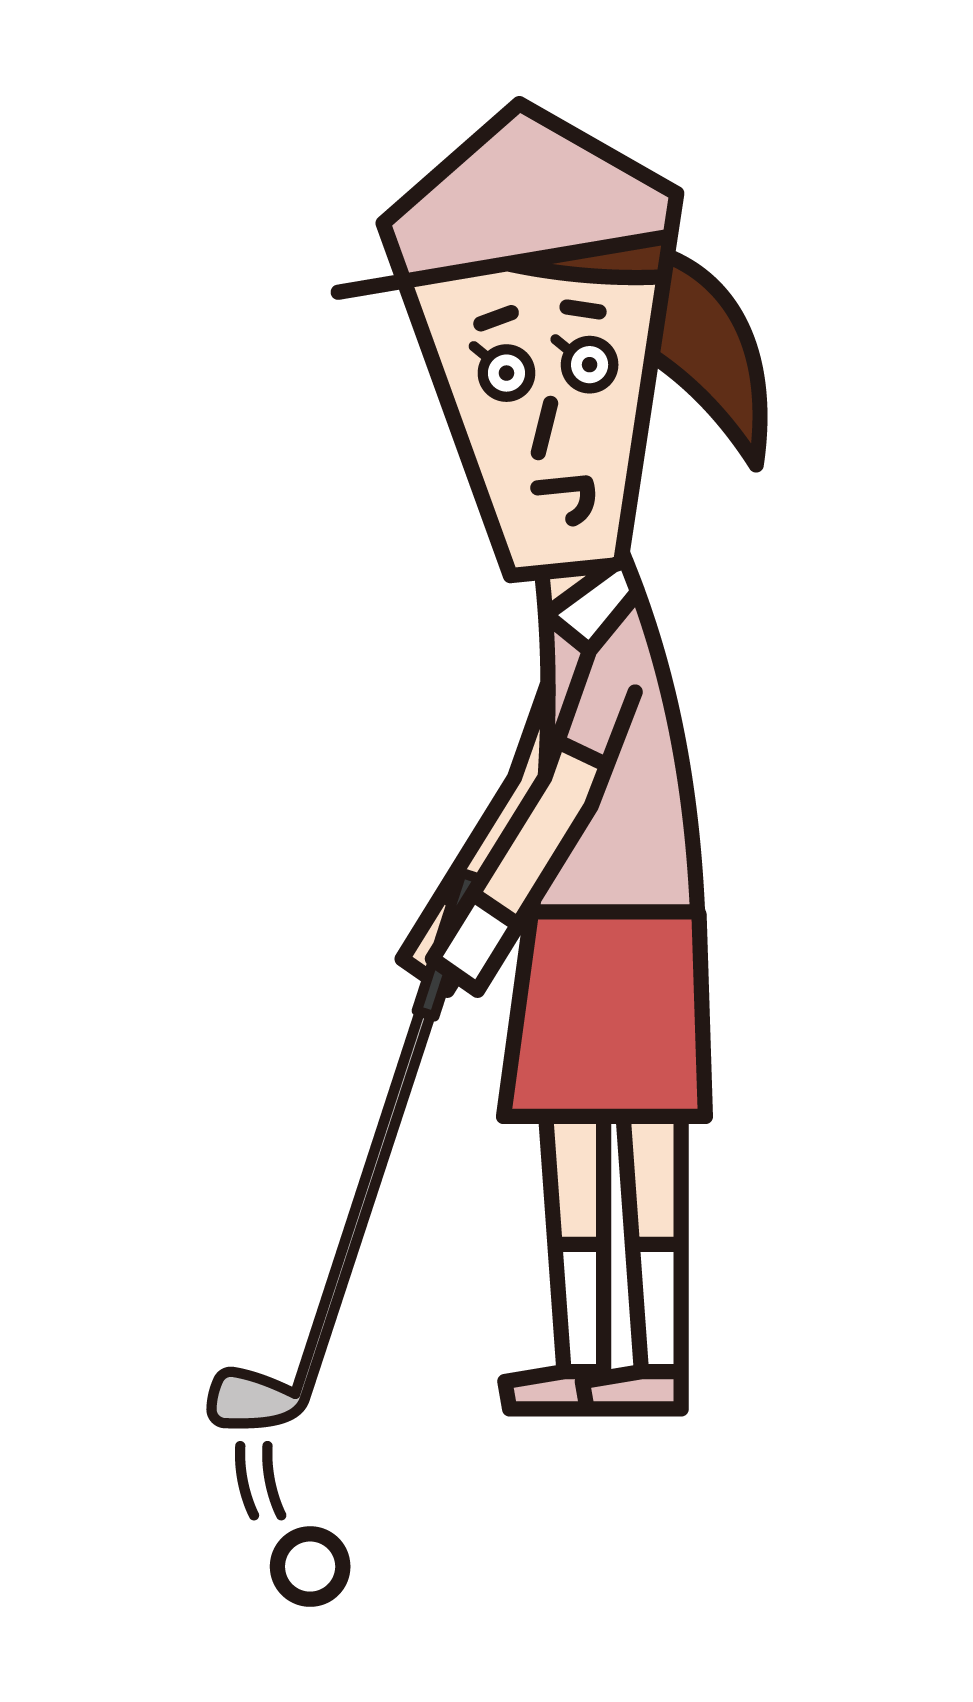 Illustration of a woman who hits a putter in golf